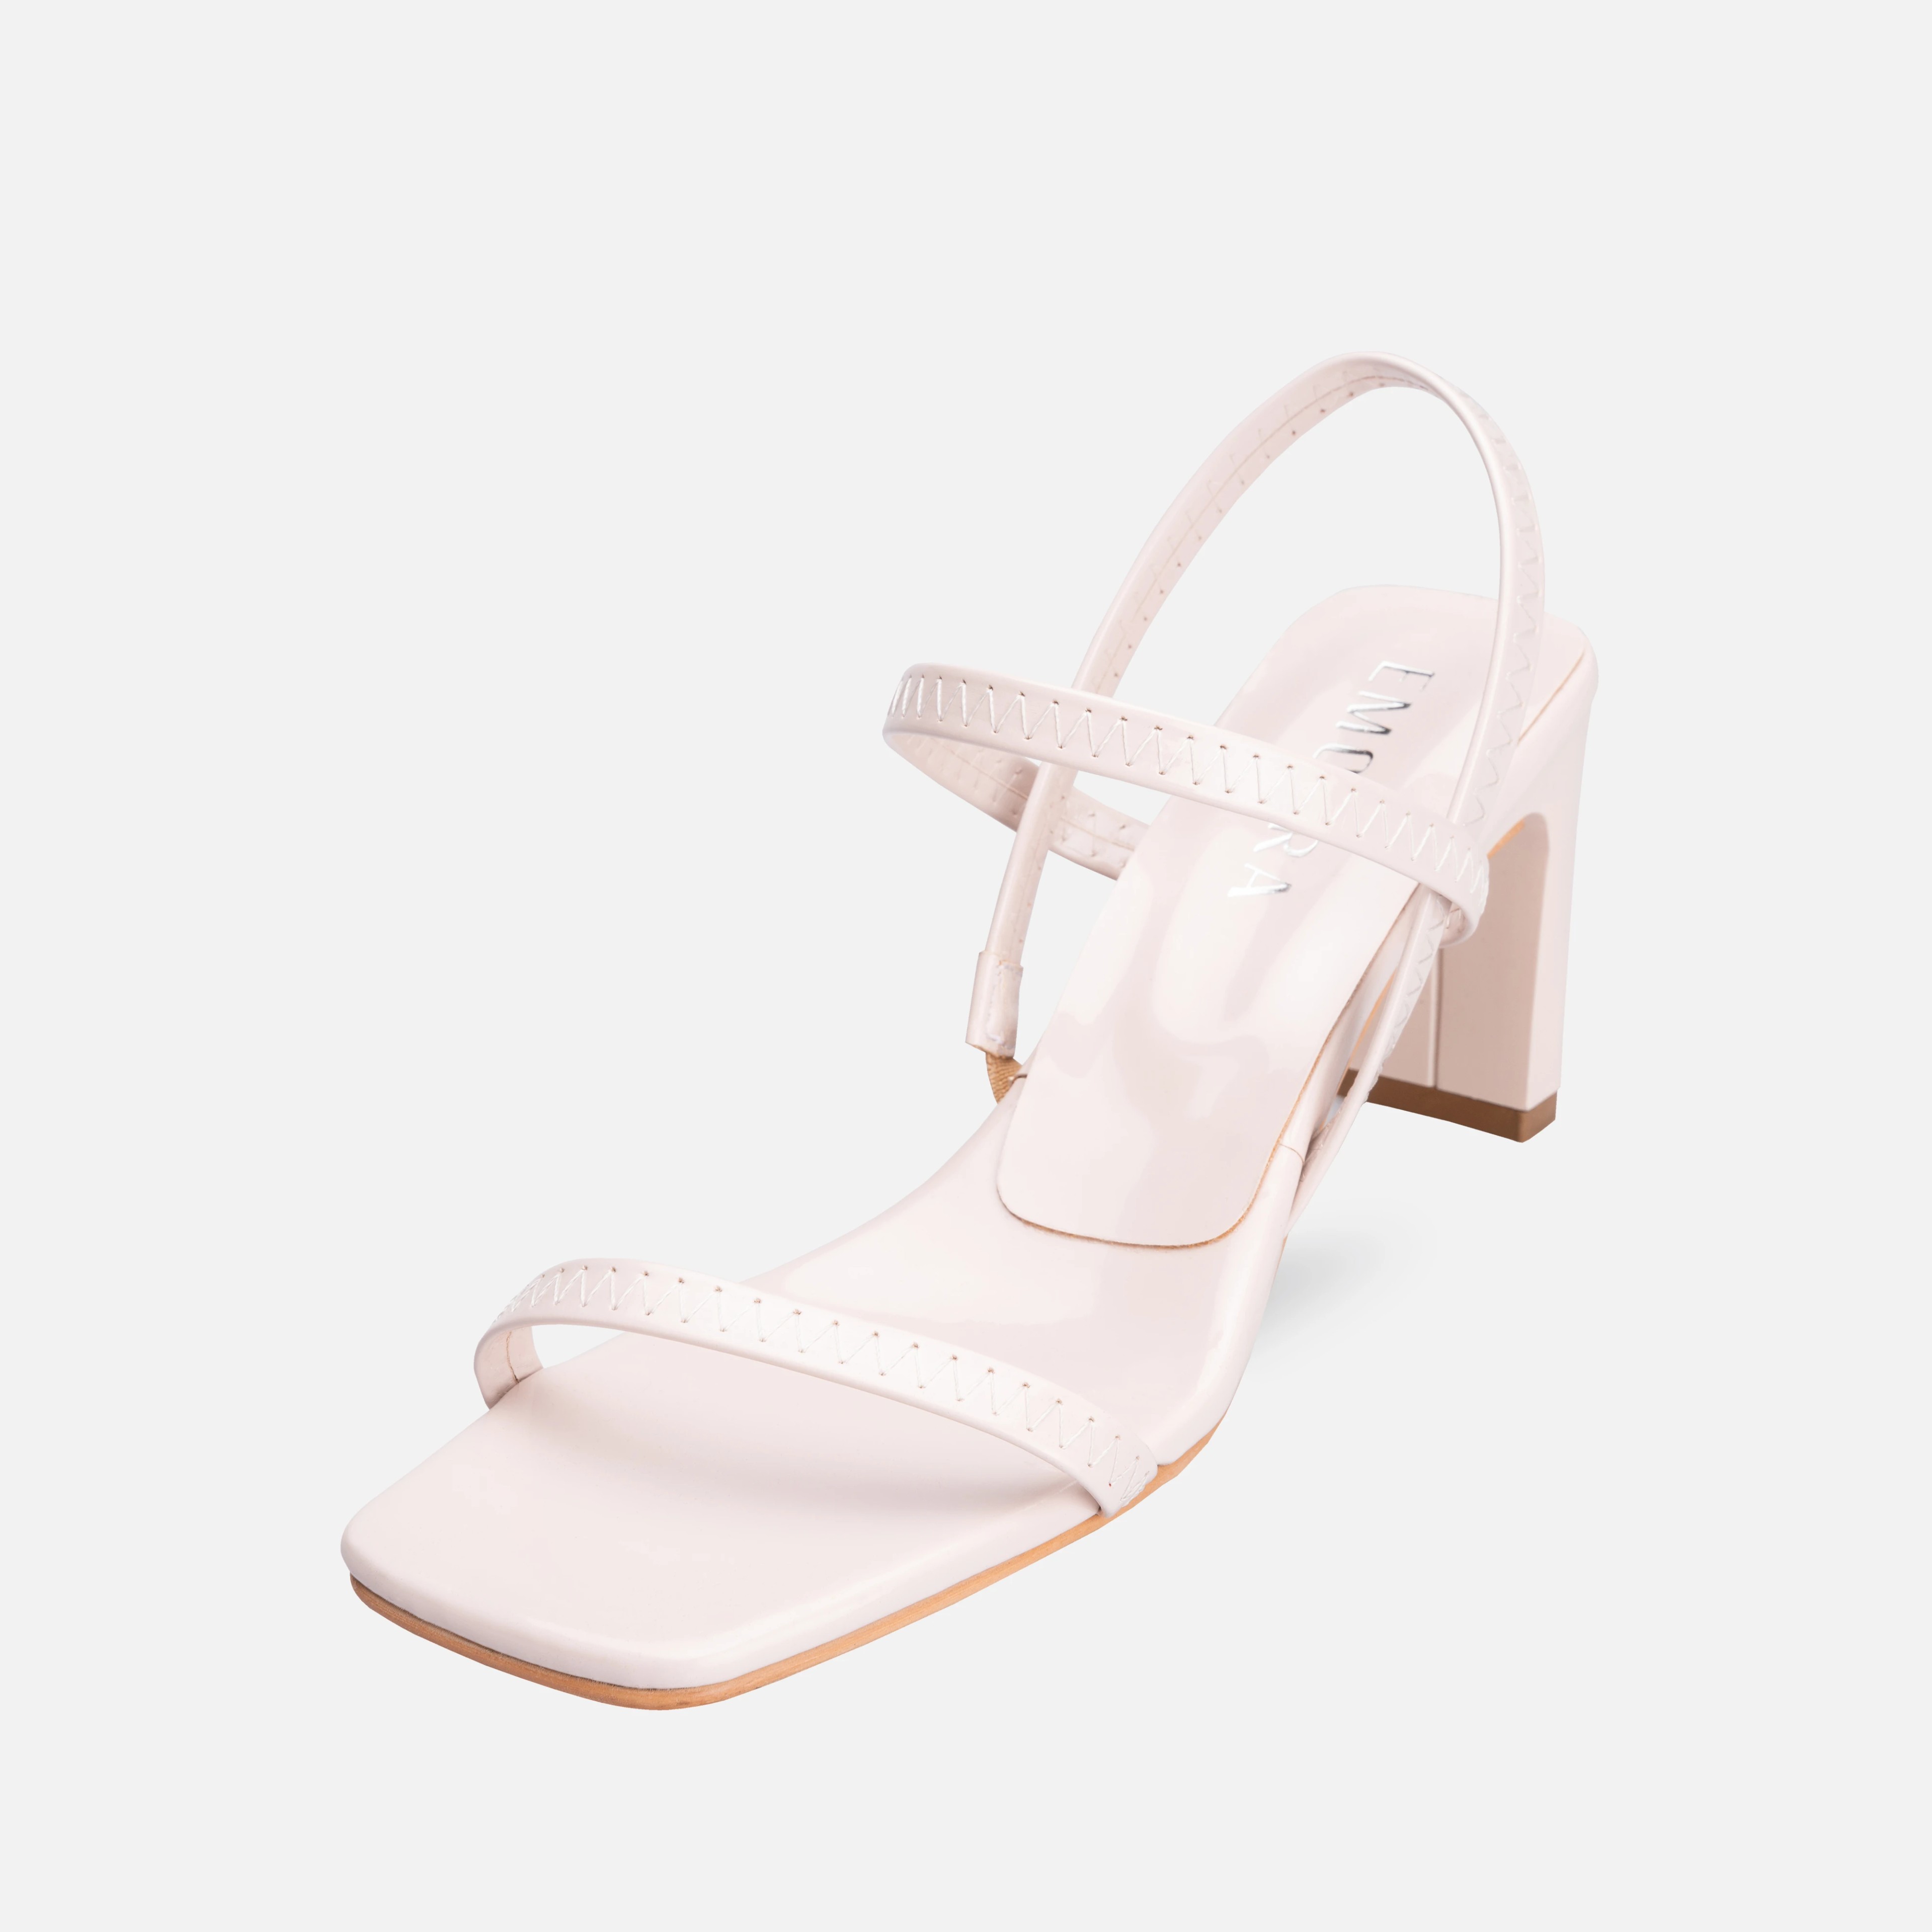 Patent Leather Thick Heeled Shoes - Beige